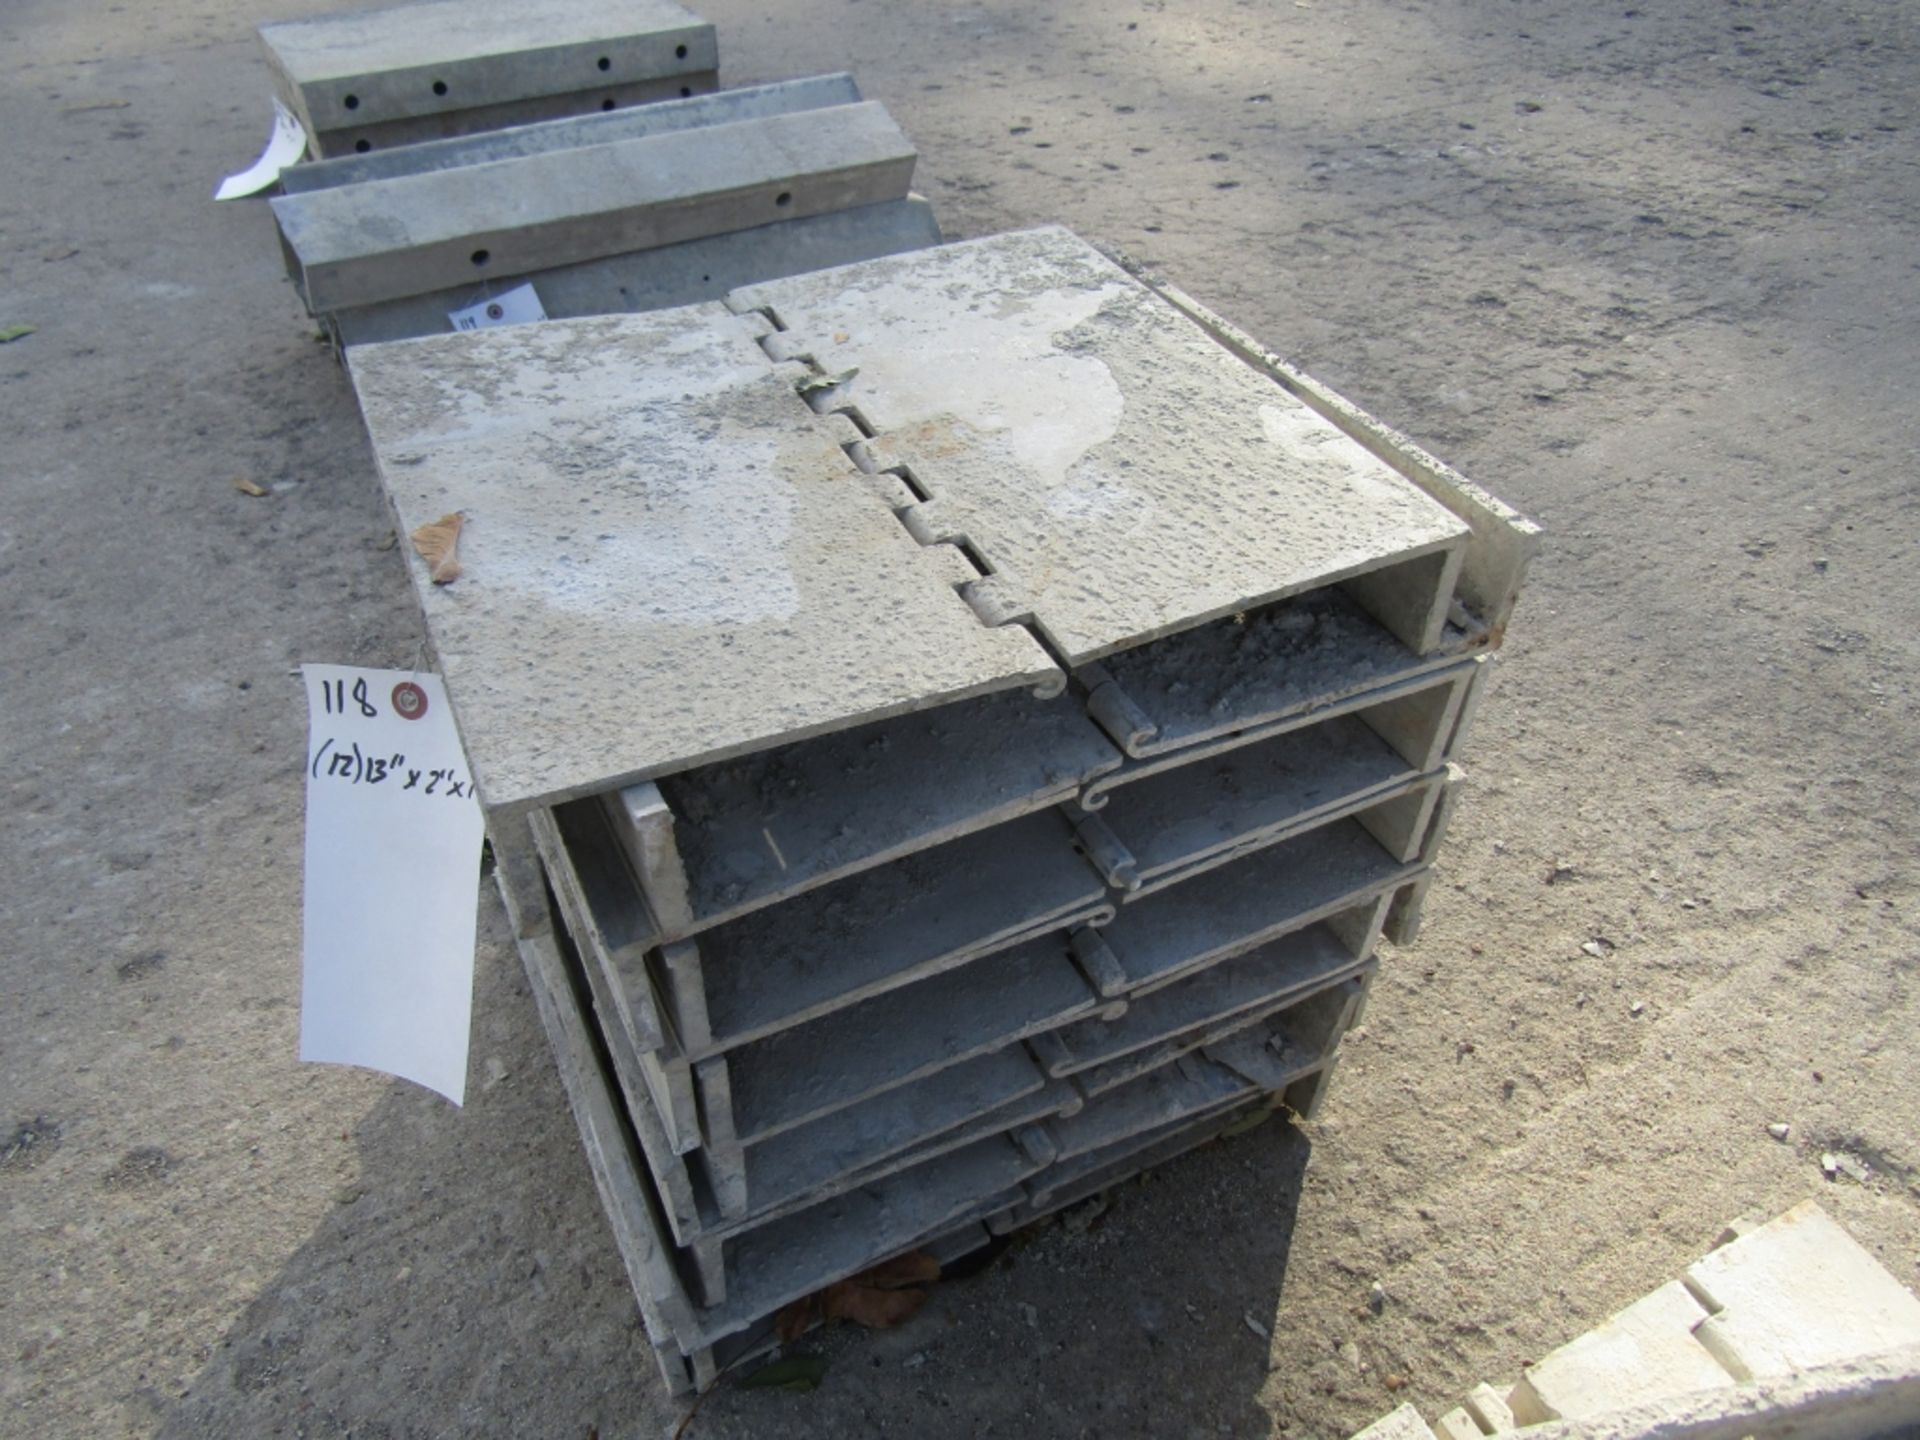 (12) 13" x 2" x 1'Durand Cap Concrete Forms Hinged, Smooth 6-12 Hole Pattern, Located in Mt. - Image 2 of 2